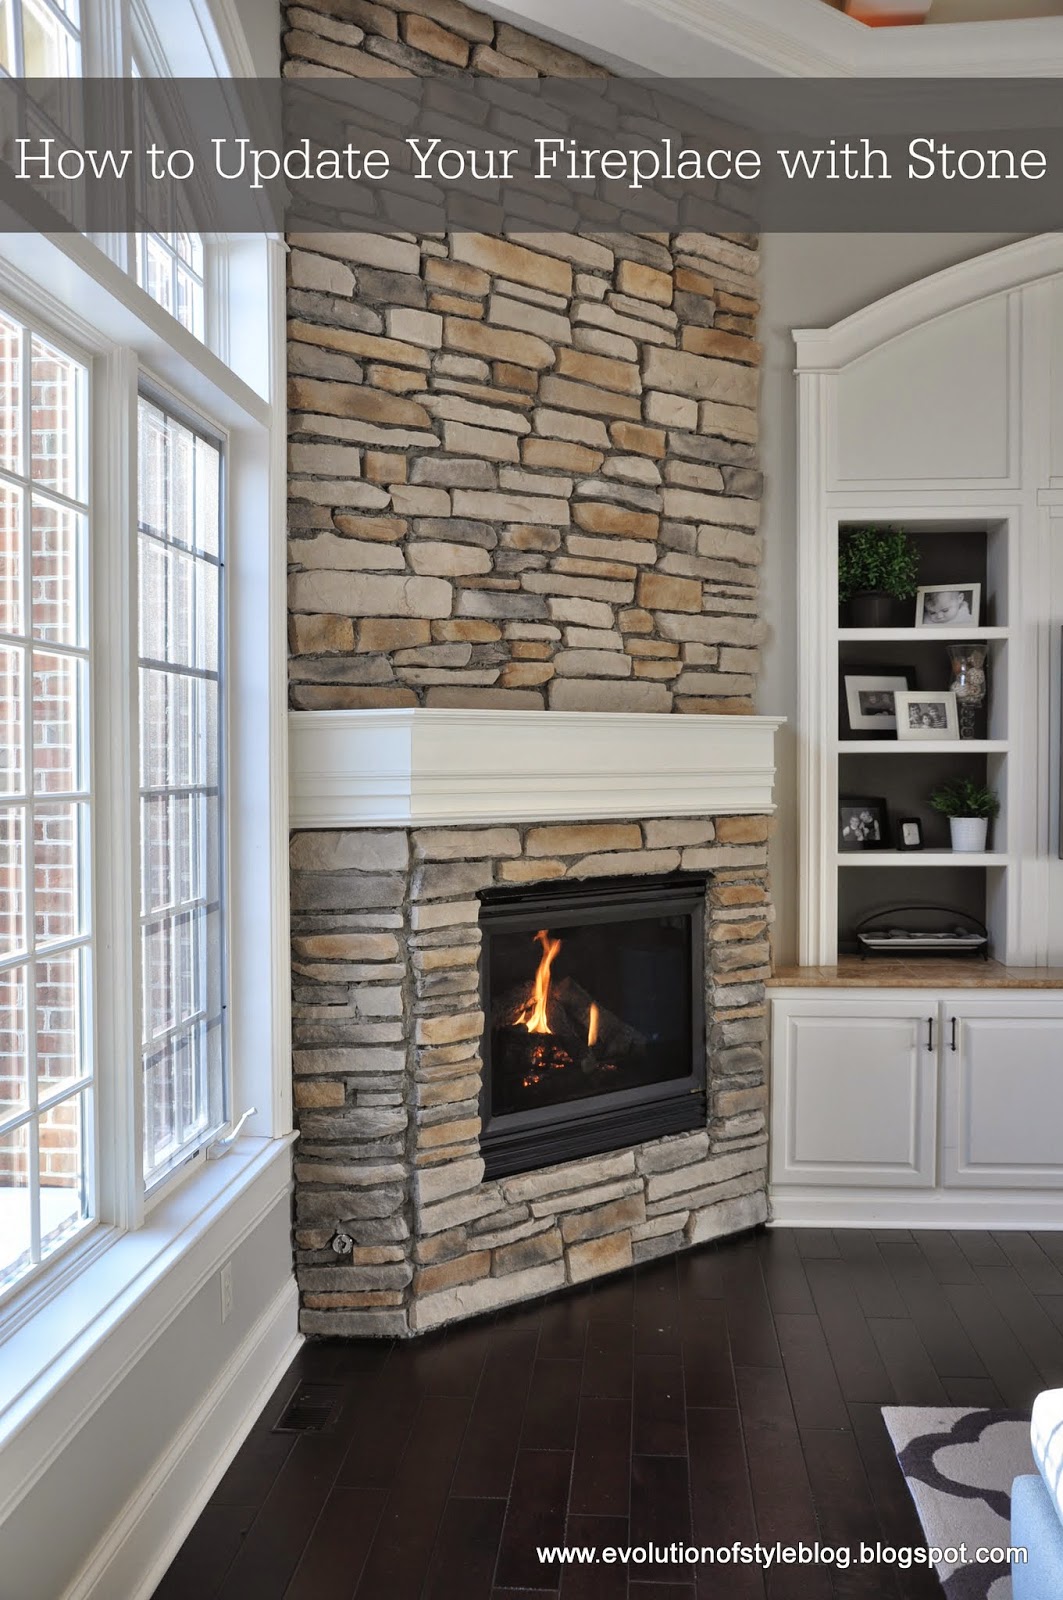 Real Flame Corner Fireplace Unique How to Update Your Fireplace with Stone Evolution Of Style